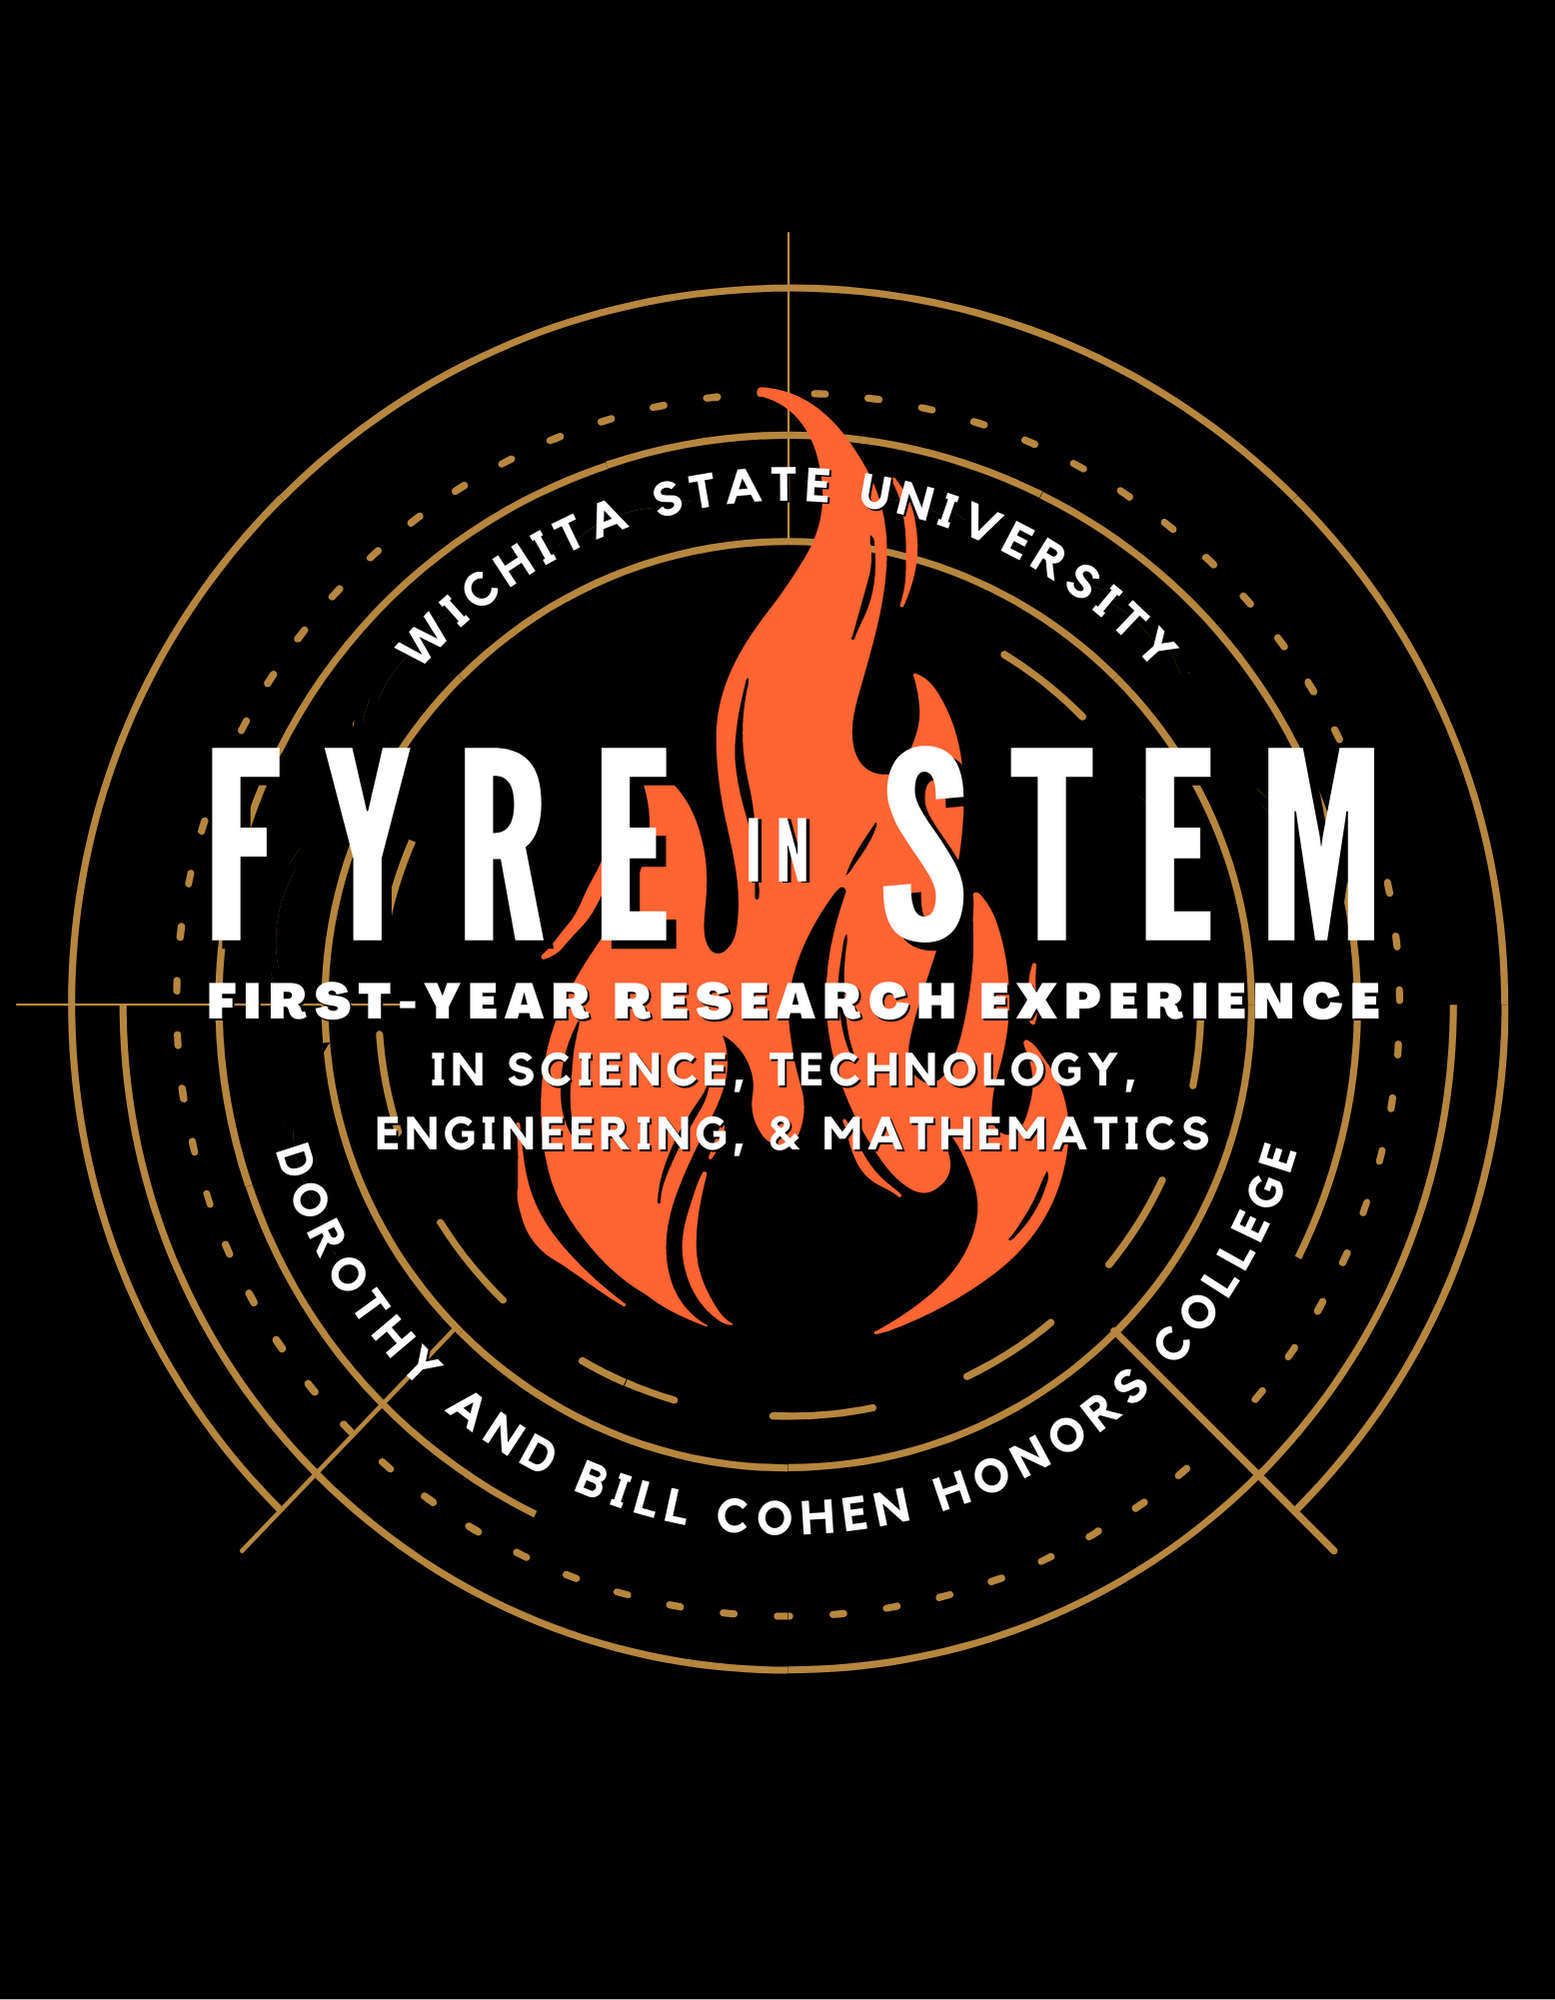 FYRE Logo - "A first-year research experience in science, technology, engineering, and mathematics."